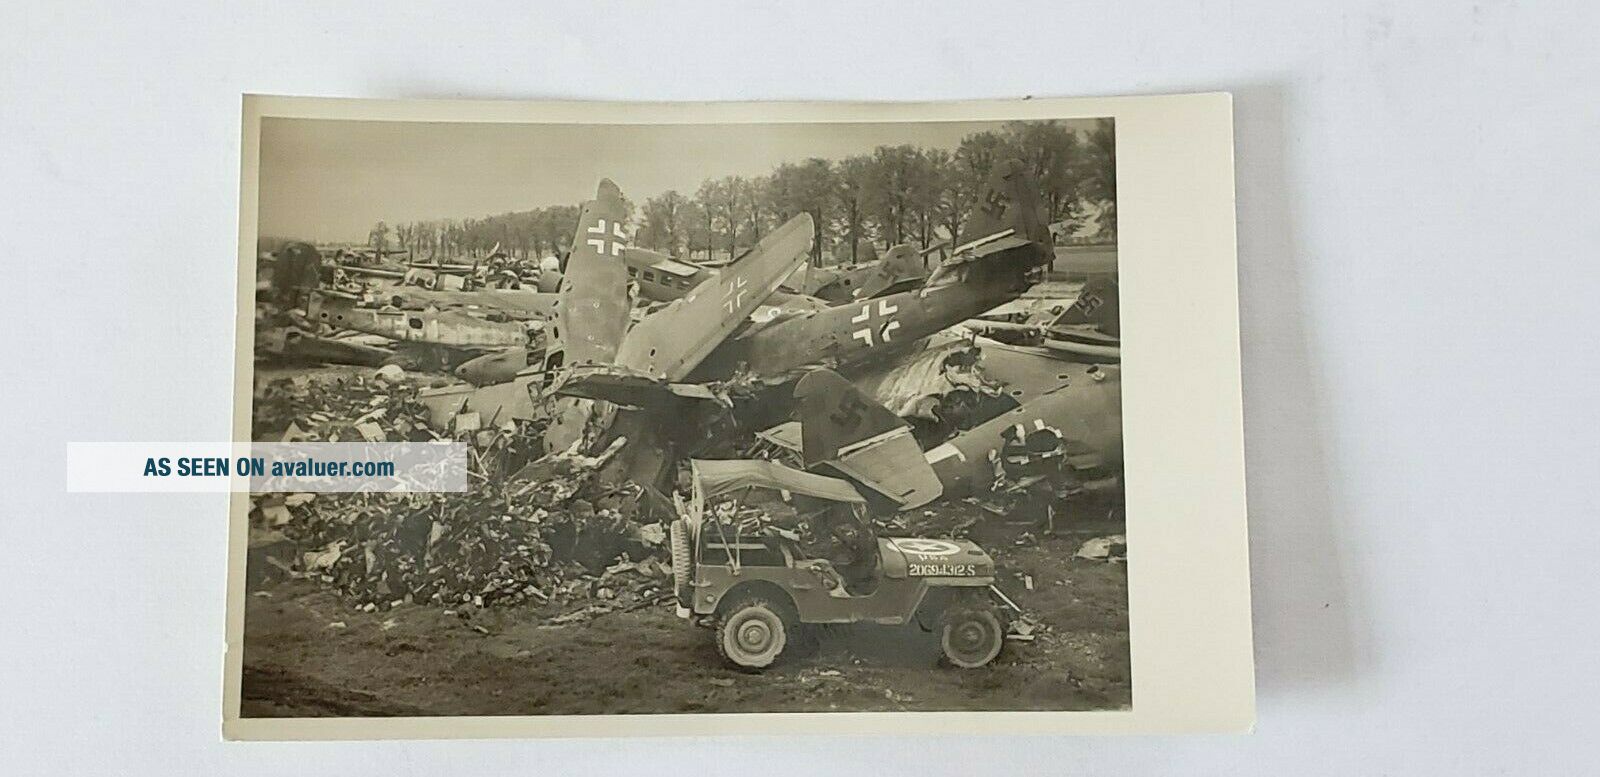 WW2 WWII postcard of destroyed German Nazi planes and Allied jeep